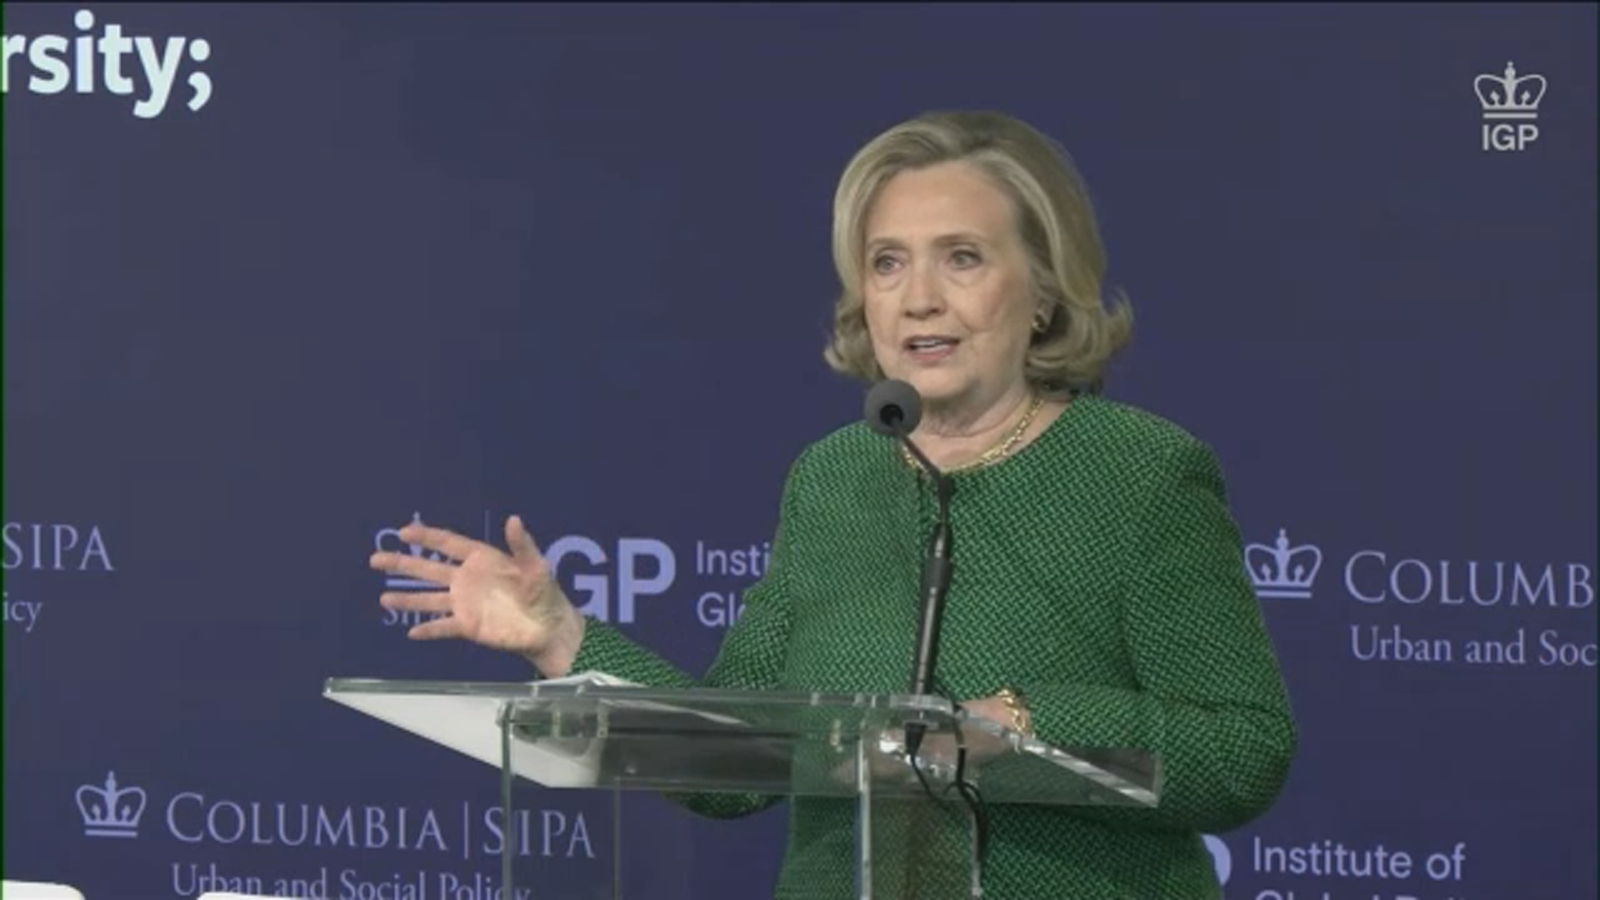 Hillary Clinton attends IGP Women’s Initiative in support of improved child care services in NYC [Video]